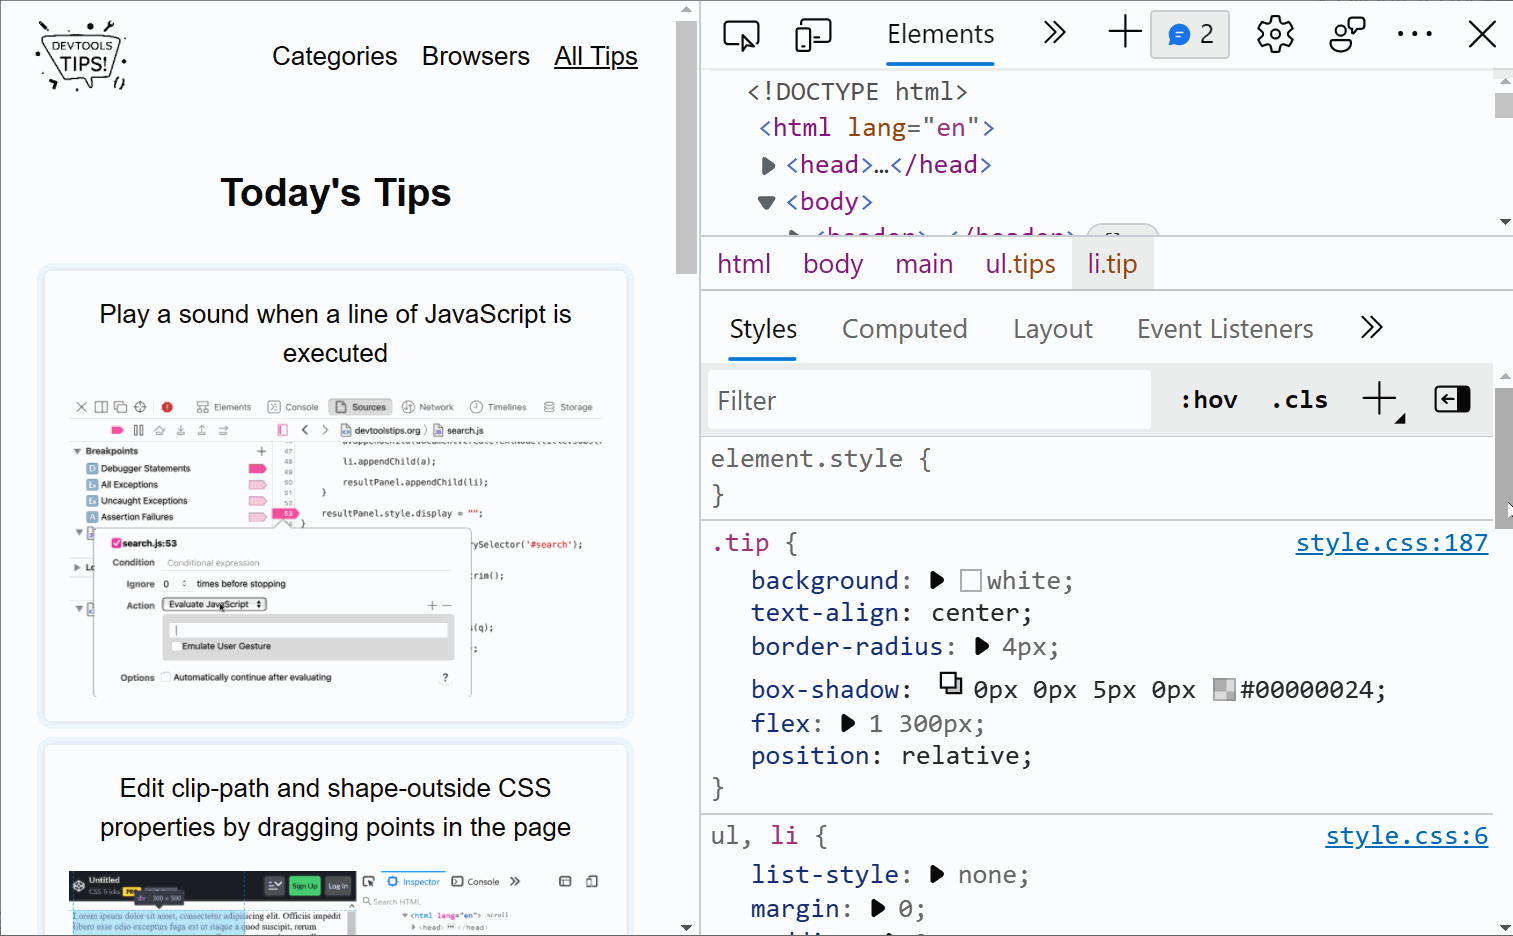 Animation showing the shadow editor in Edge's Styles pane.